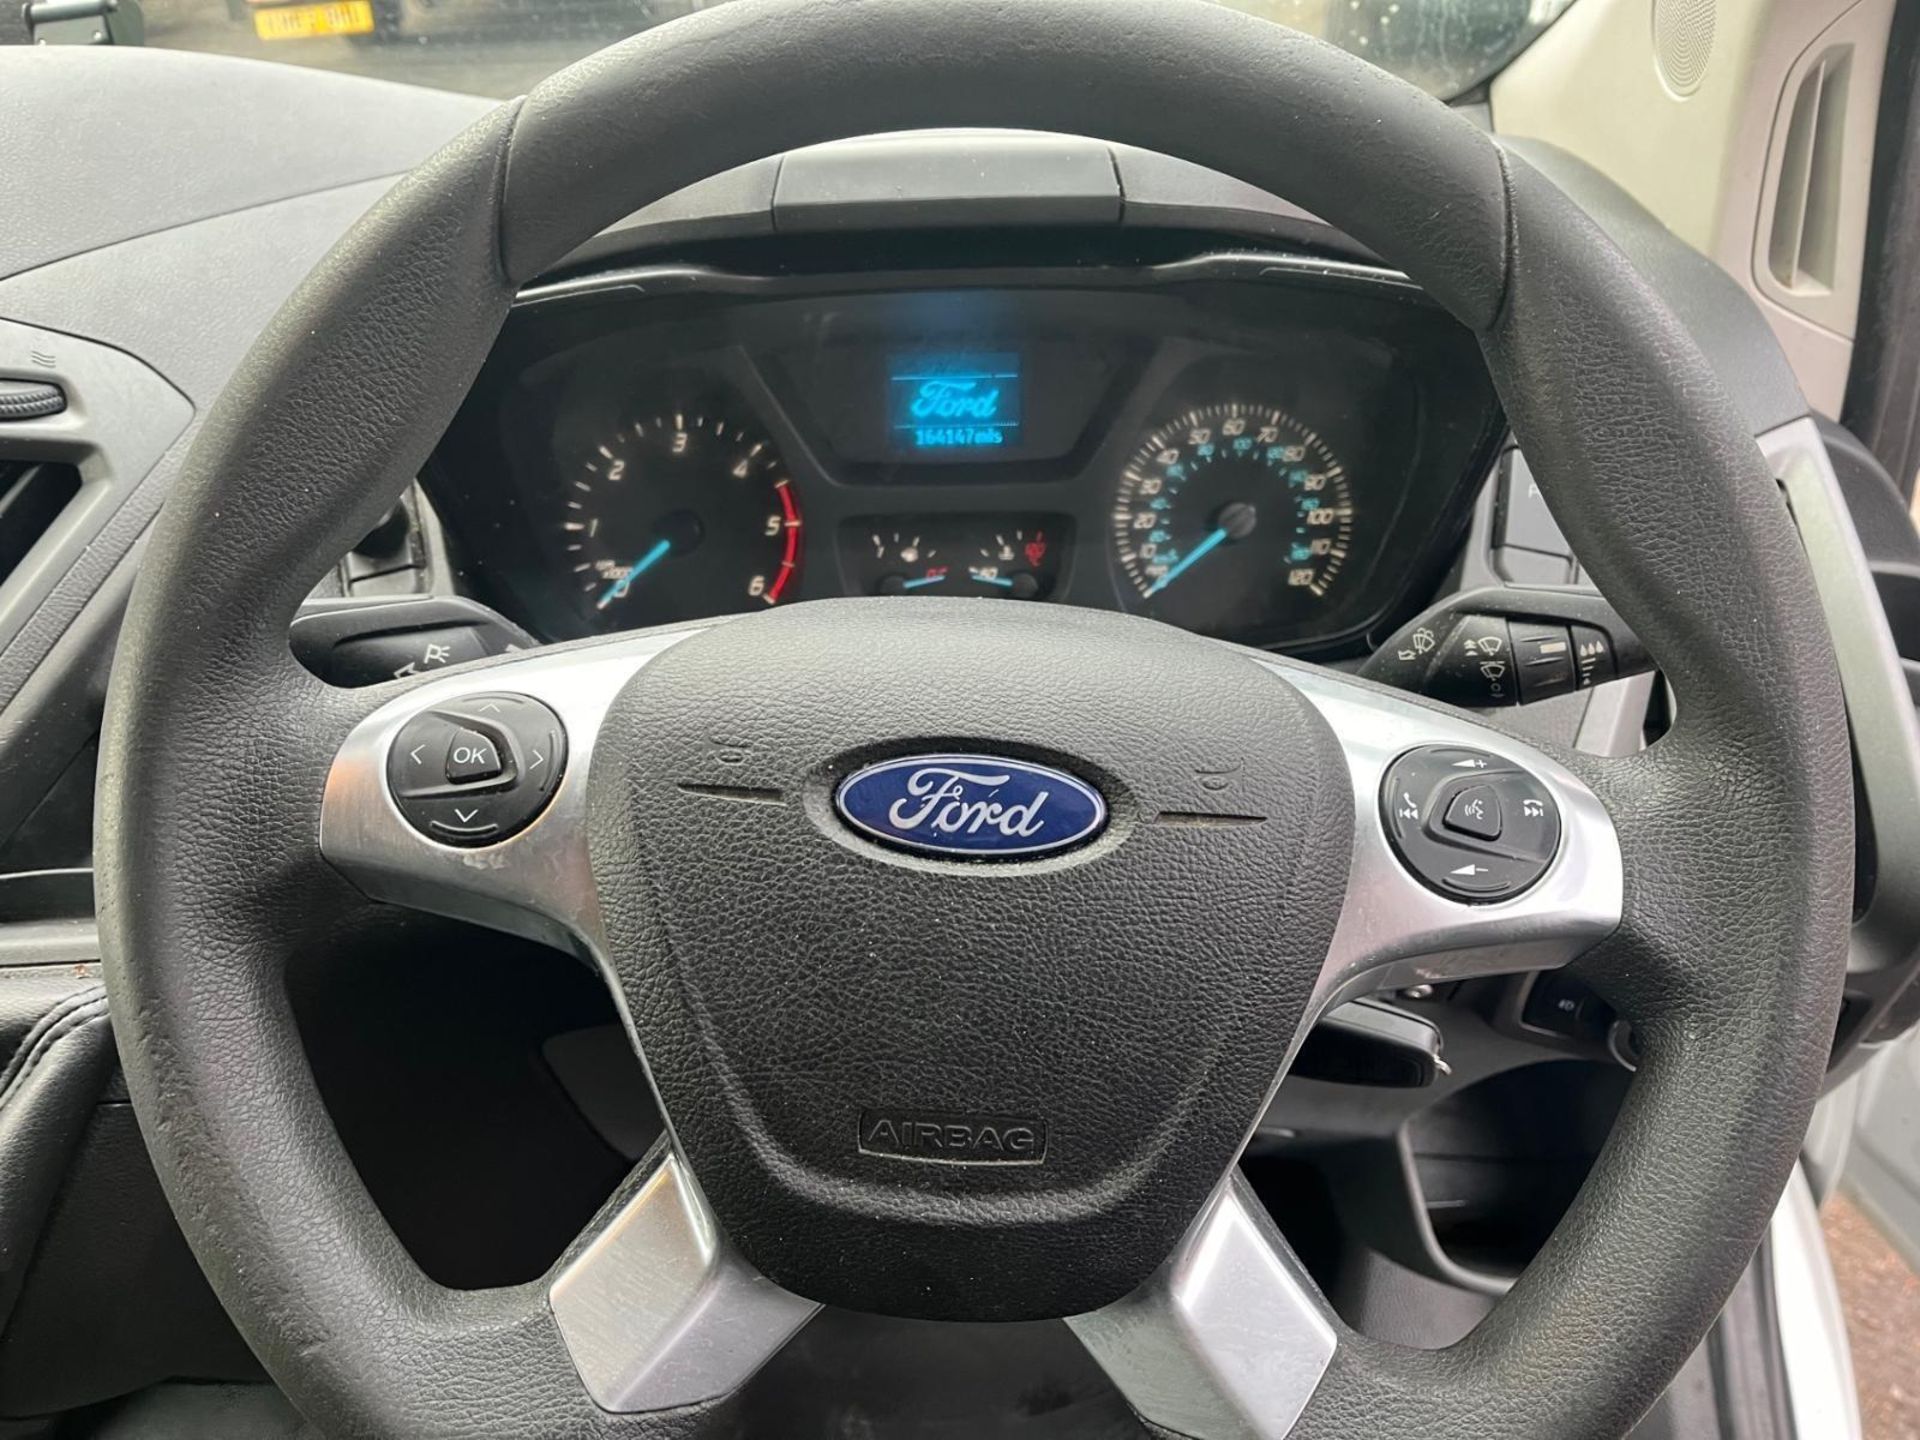 2018 FORD TRANSIT CUSTOM TDCI 130 L1 H1 SWB PANEL VAN ->>>SPECIAL CLEARANCE<<< - Image 10 of 15